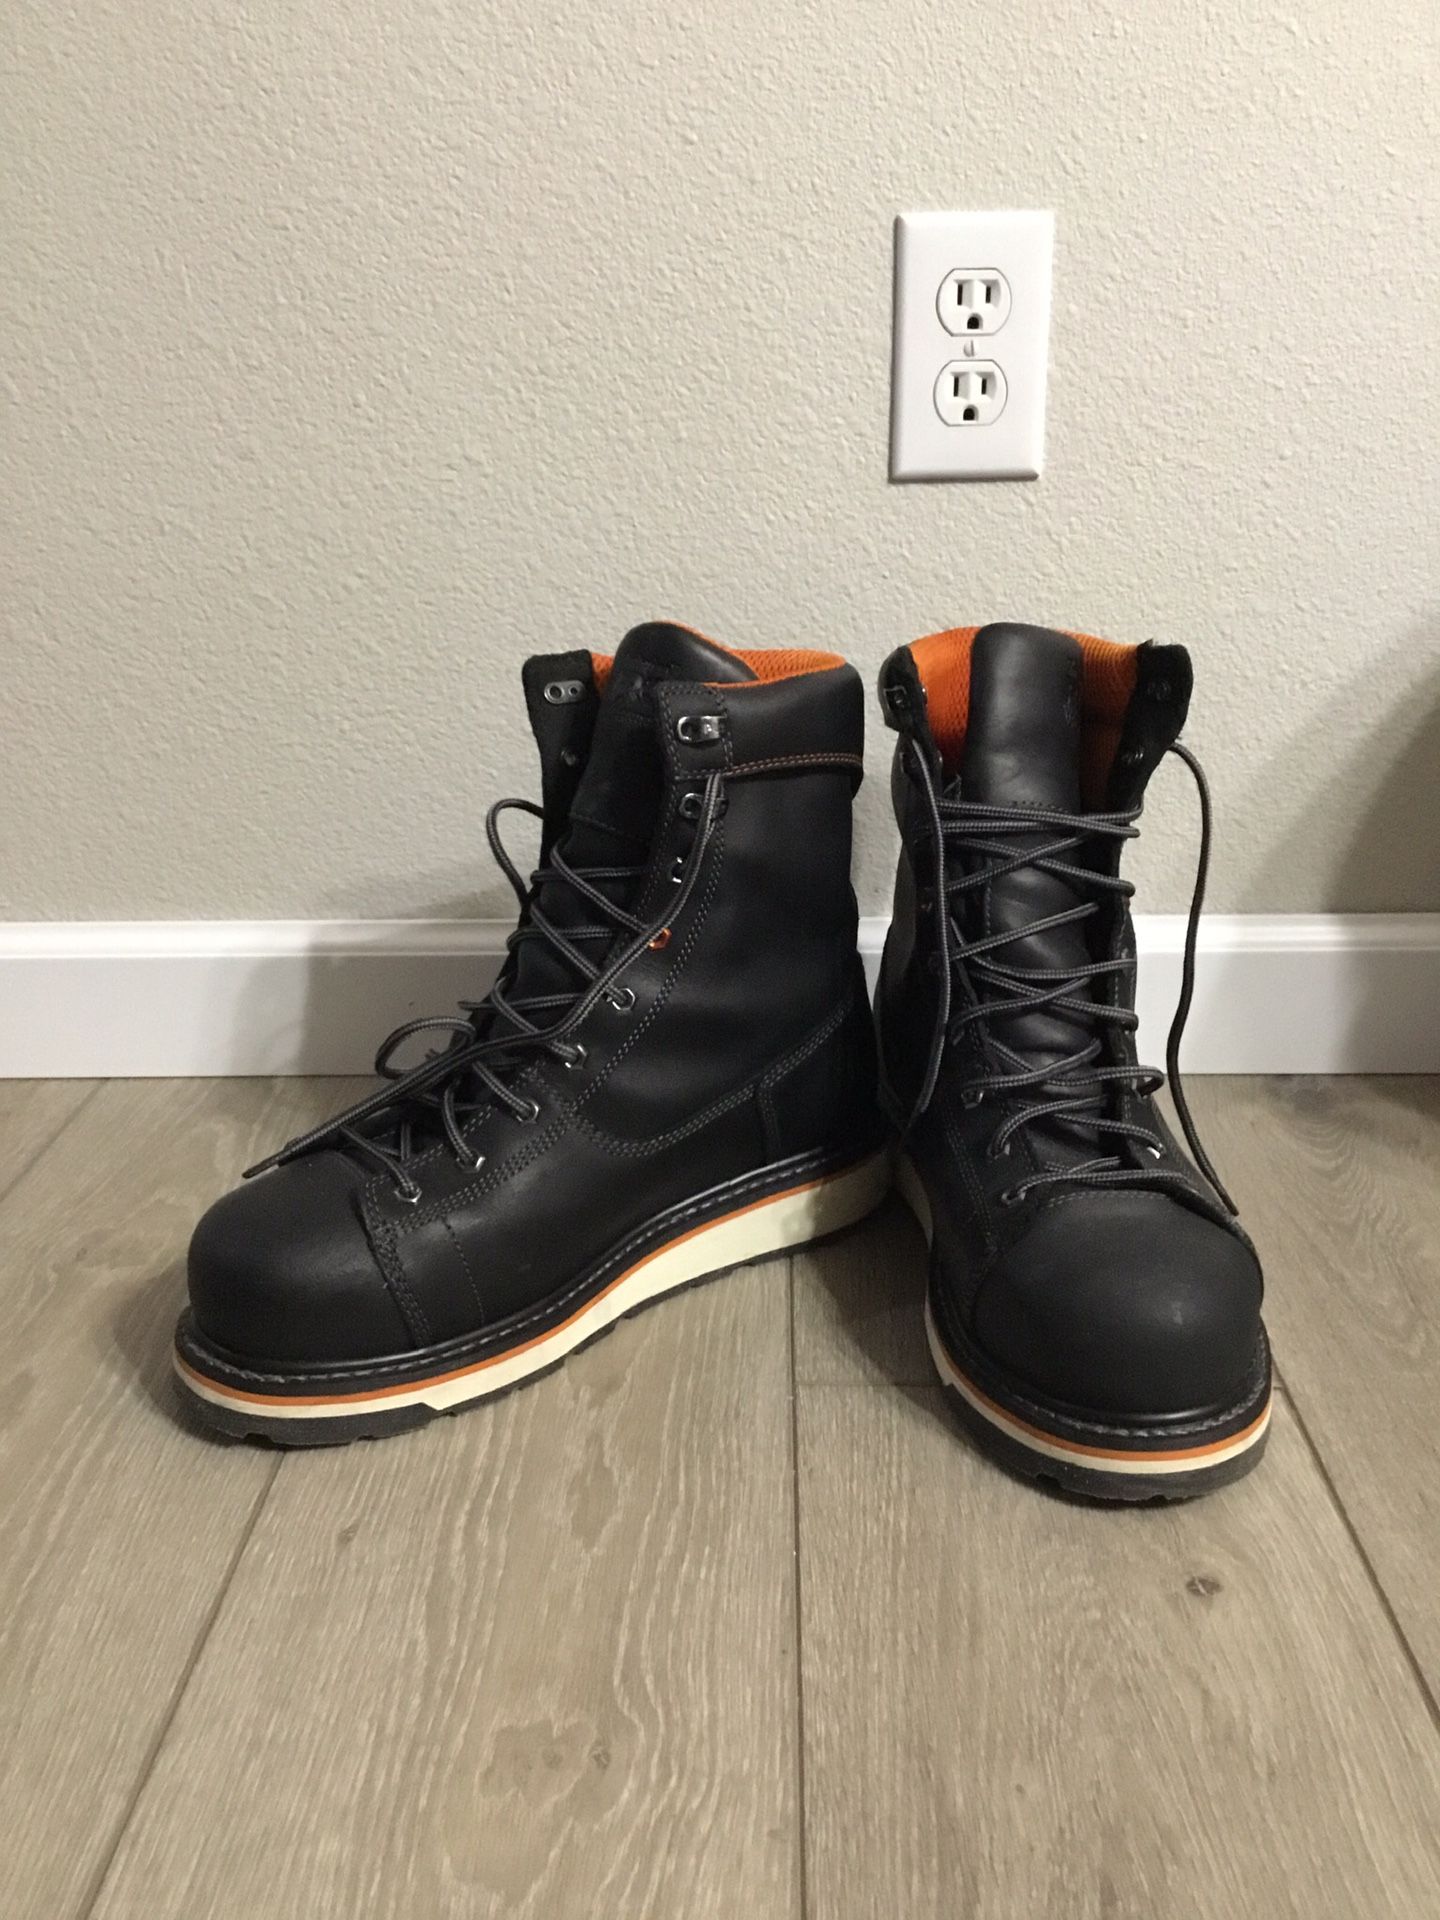 Men’s Timberland PRO Gridworks Industrial Boot